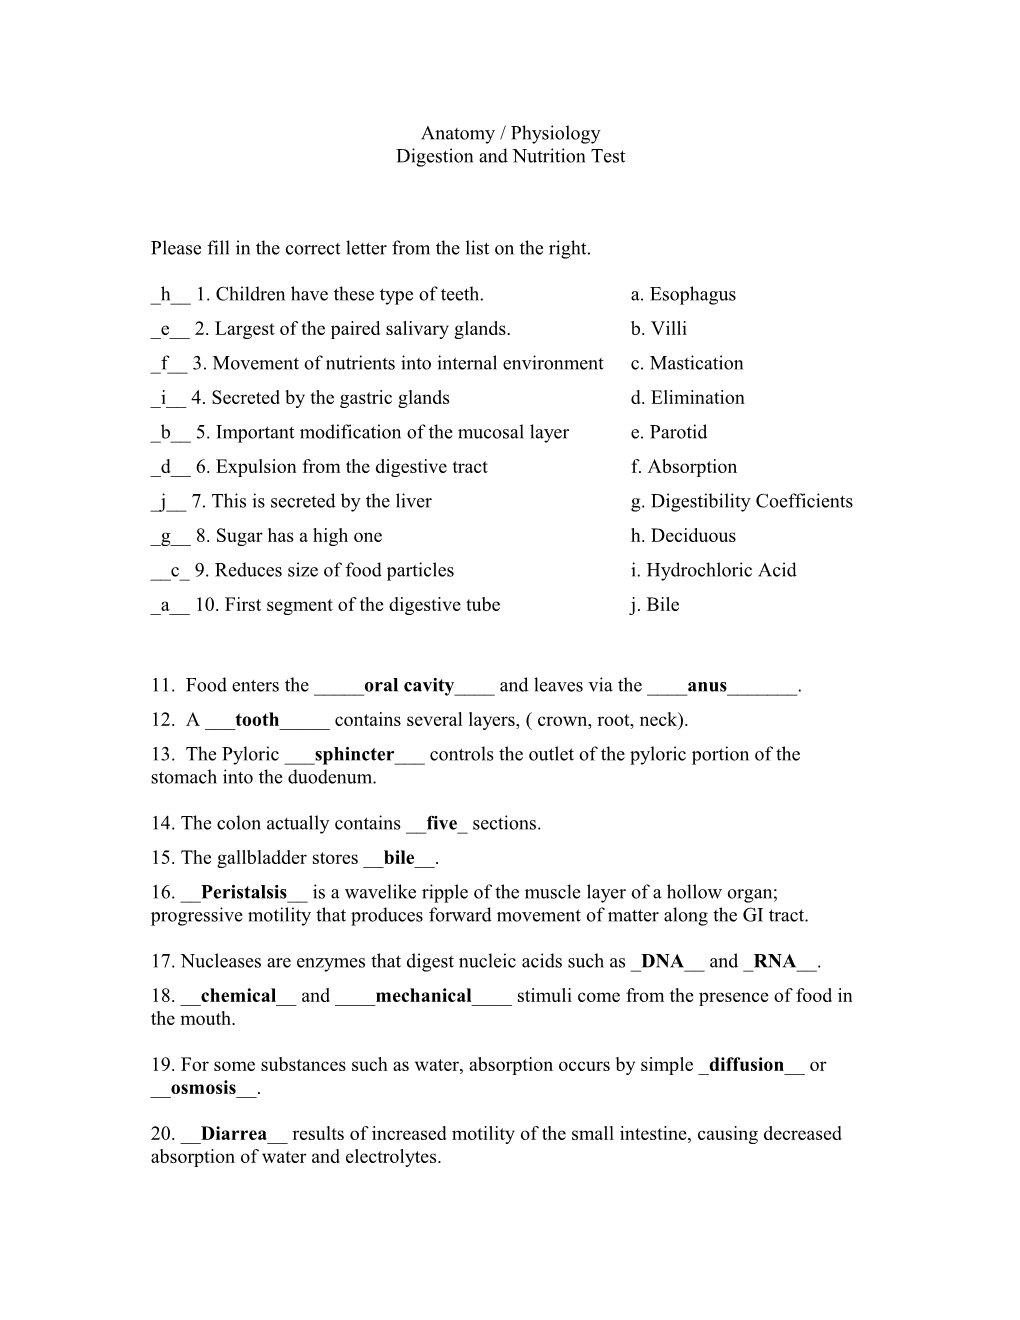 Digestion and Nutrition Test